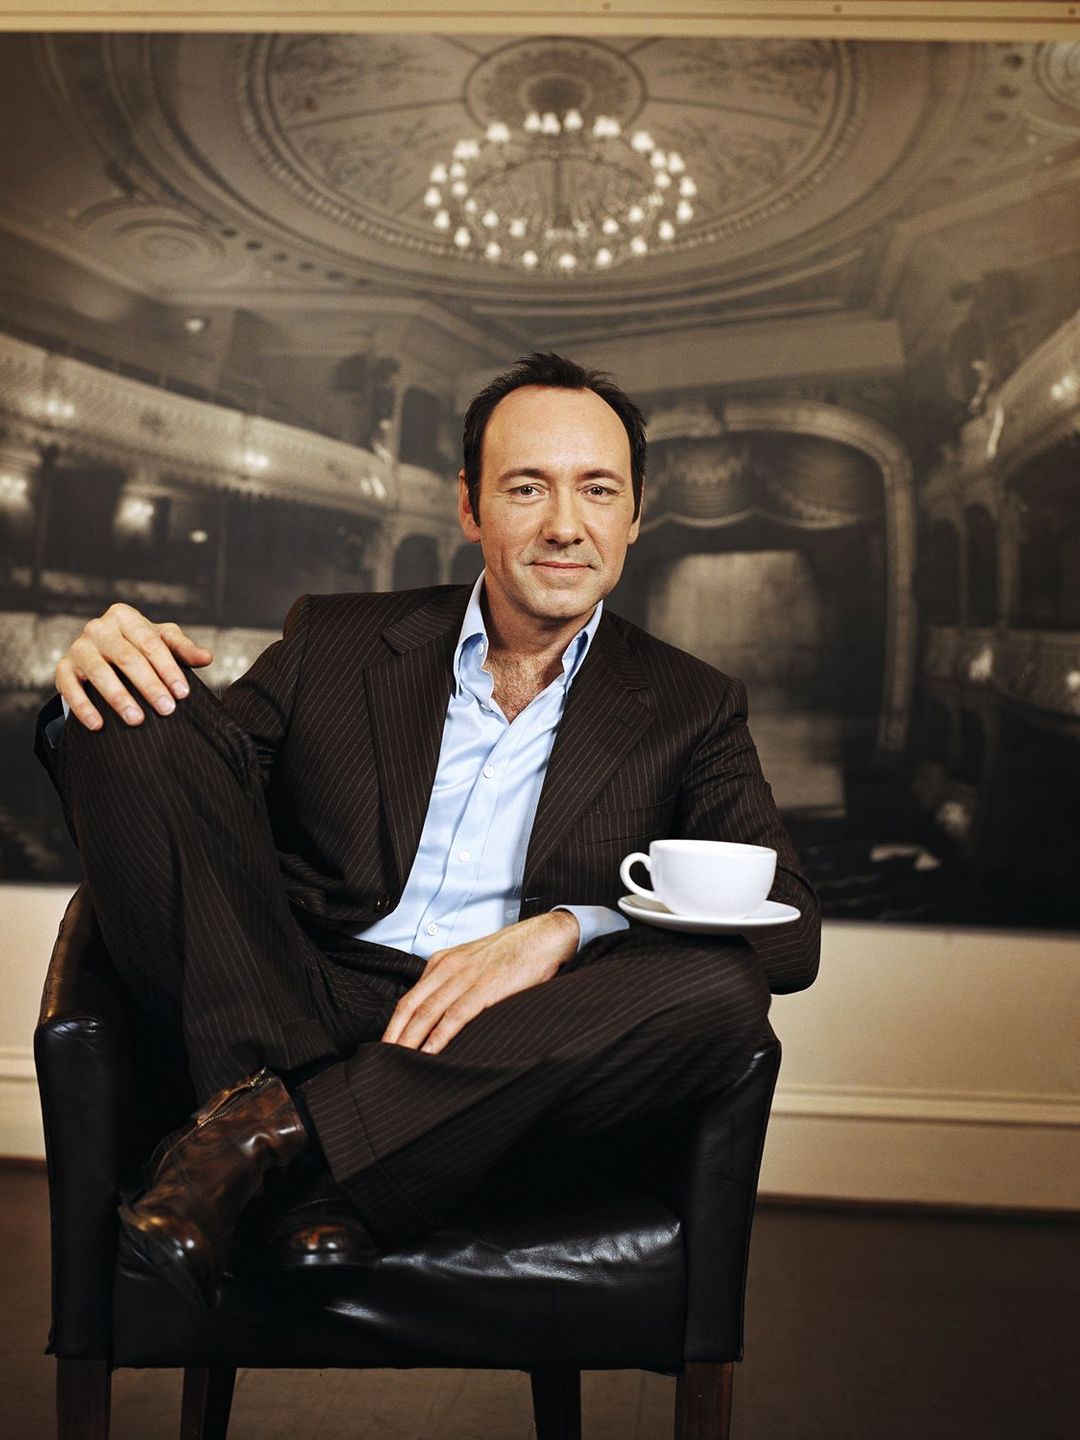 Kevin Spacey biography